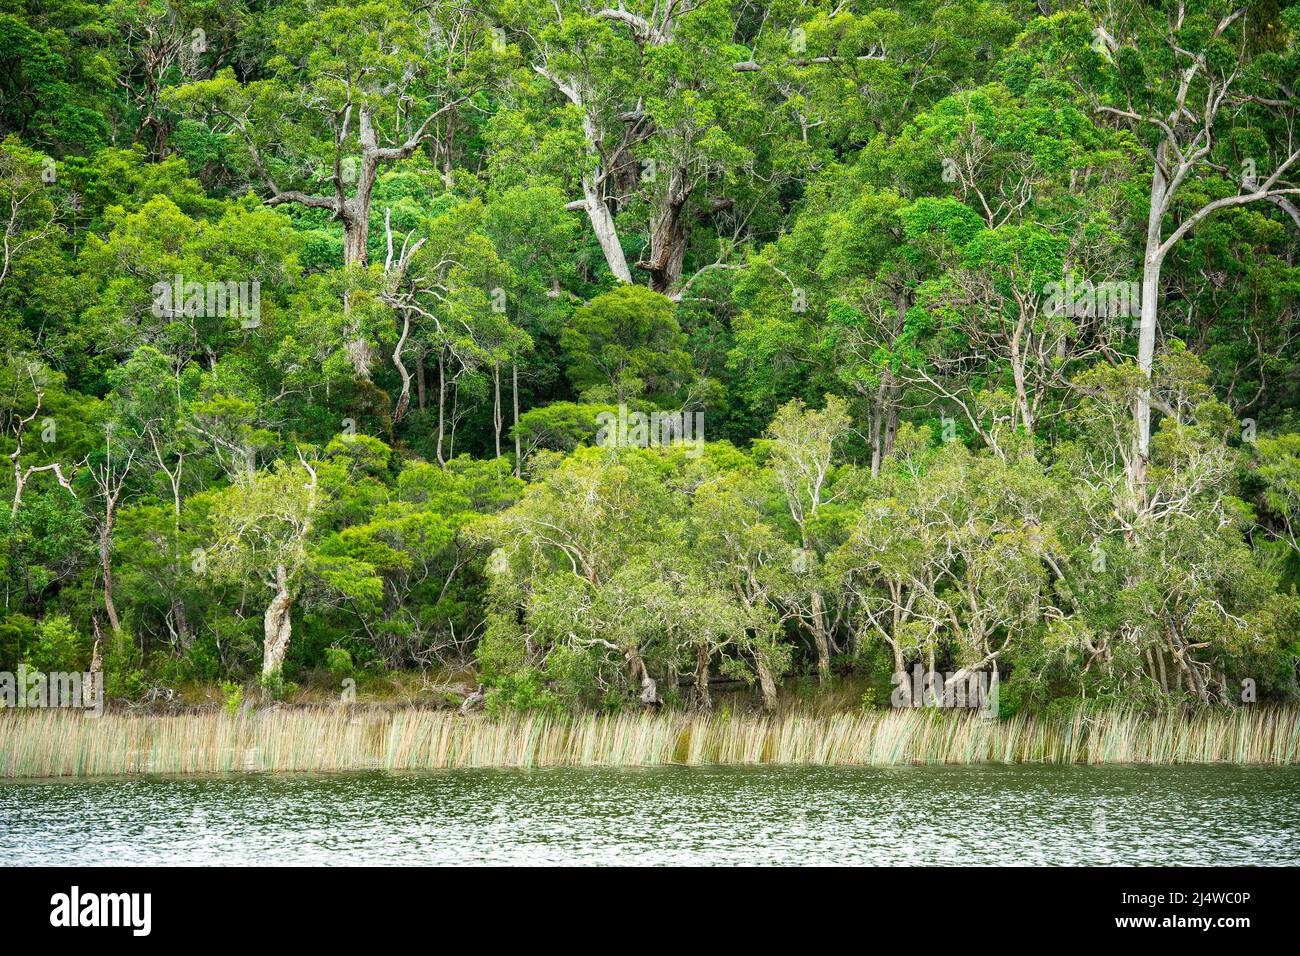 Lake Allom is a sightseers treasure, tucked in a forest of Melaleuca trees (paperbark), Hoop Pines (Araucaria Cunninghamii) and sedges. Stock Photo